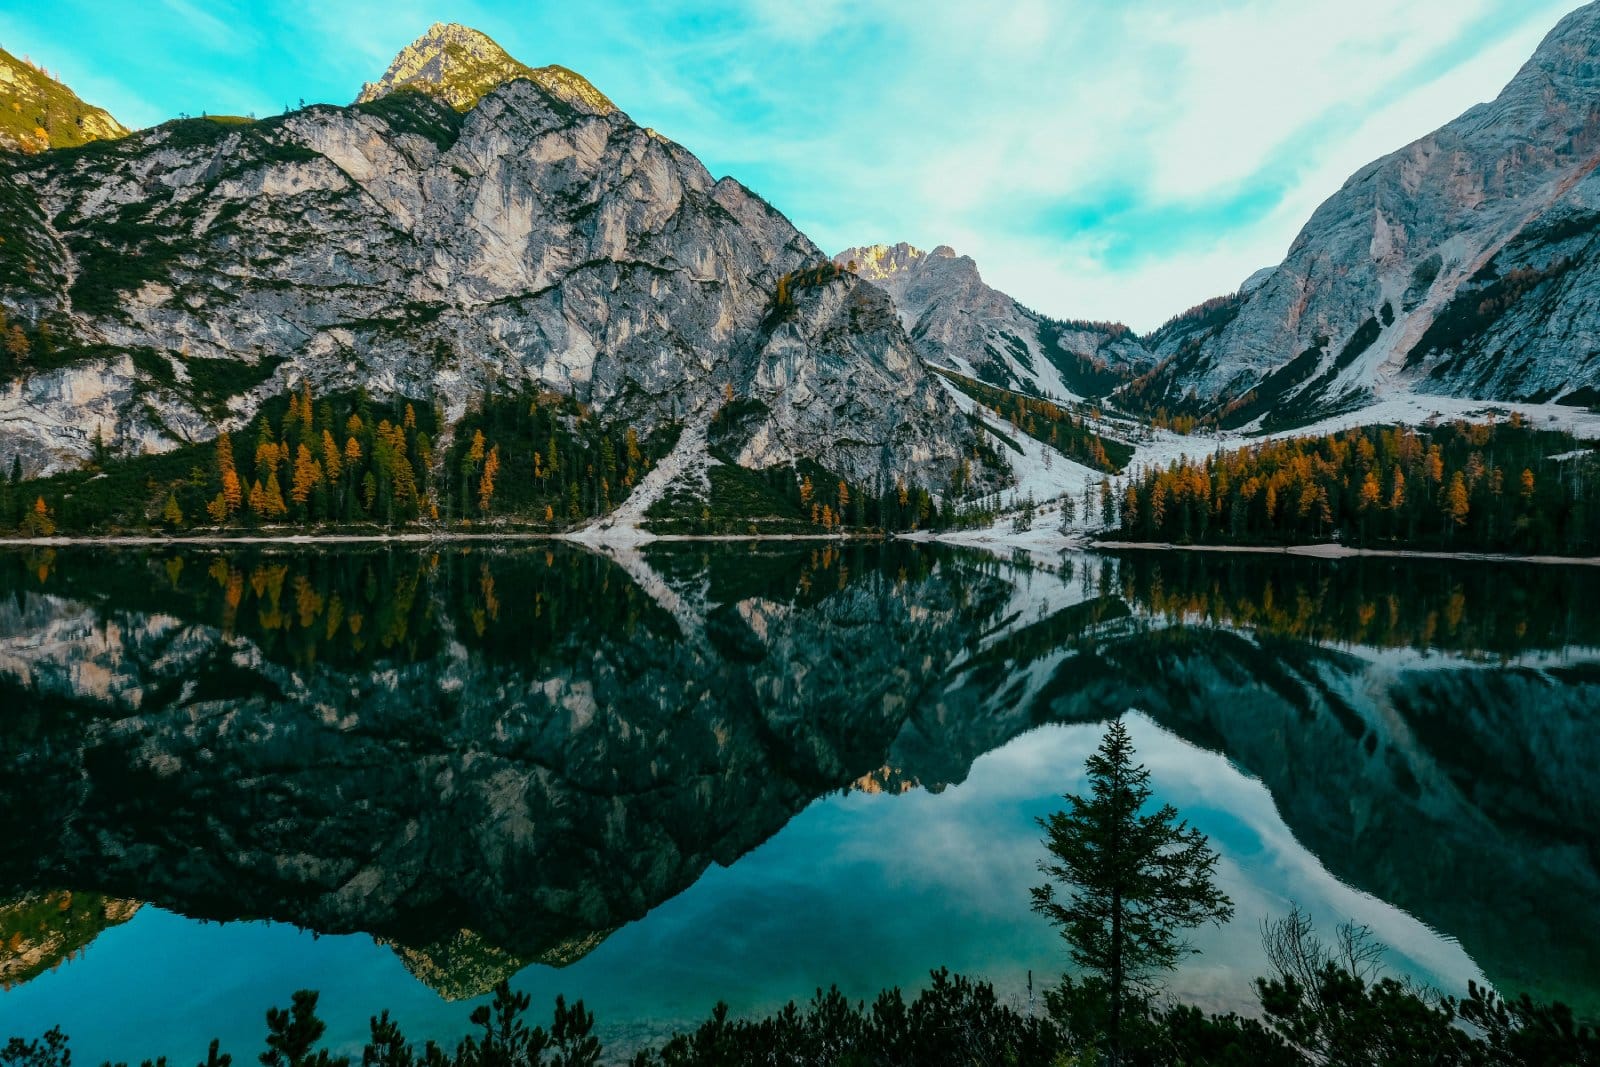 <p class="wp-caption-text">Image Credit: Pexels / Francesco Ungaro</p>  <p><span>Lake Braies, known as Pragser Wildsee in German, is a pristine alpine lake nestled in a valley surrounded by forested mountains. Its emerald waters reflect the towering peaks, making it one of the most photographed spots in the Dolomites. Visitors can enjoy a leisurely walk around the lake or rent a traditional wooden boat to paddle the tranquil waters. The lake is also a starting point for several hiking trails, including paths leading to the Fanes-Sennes-Braies National Park.</span></p>